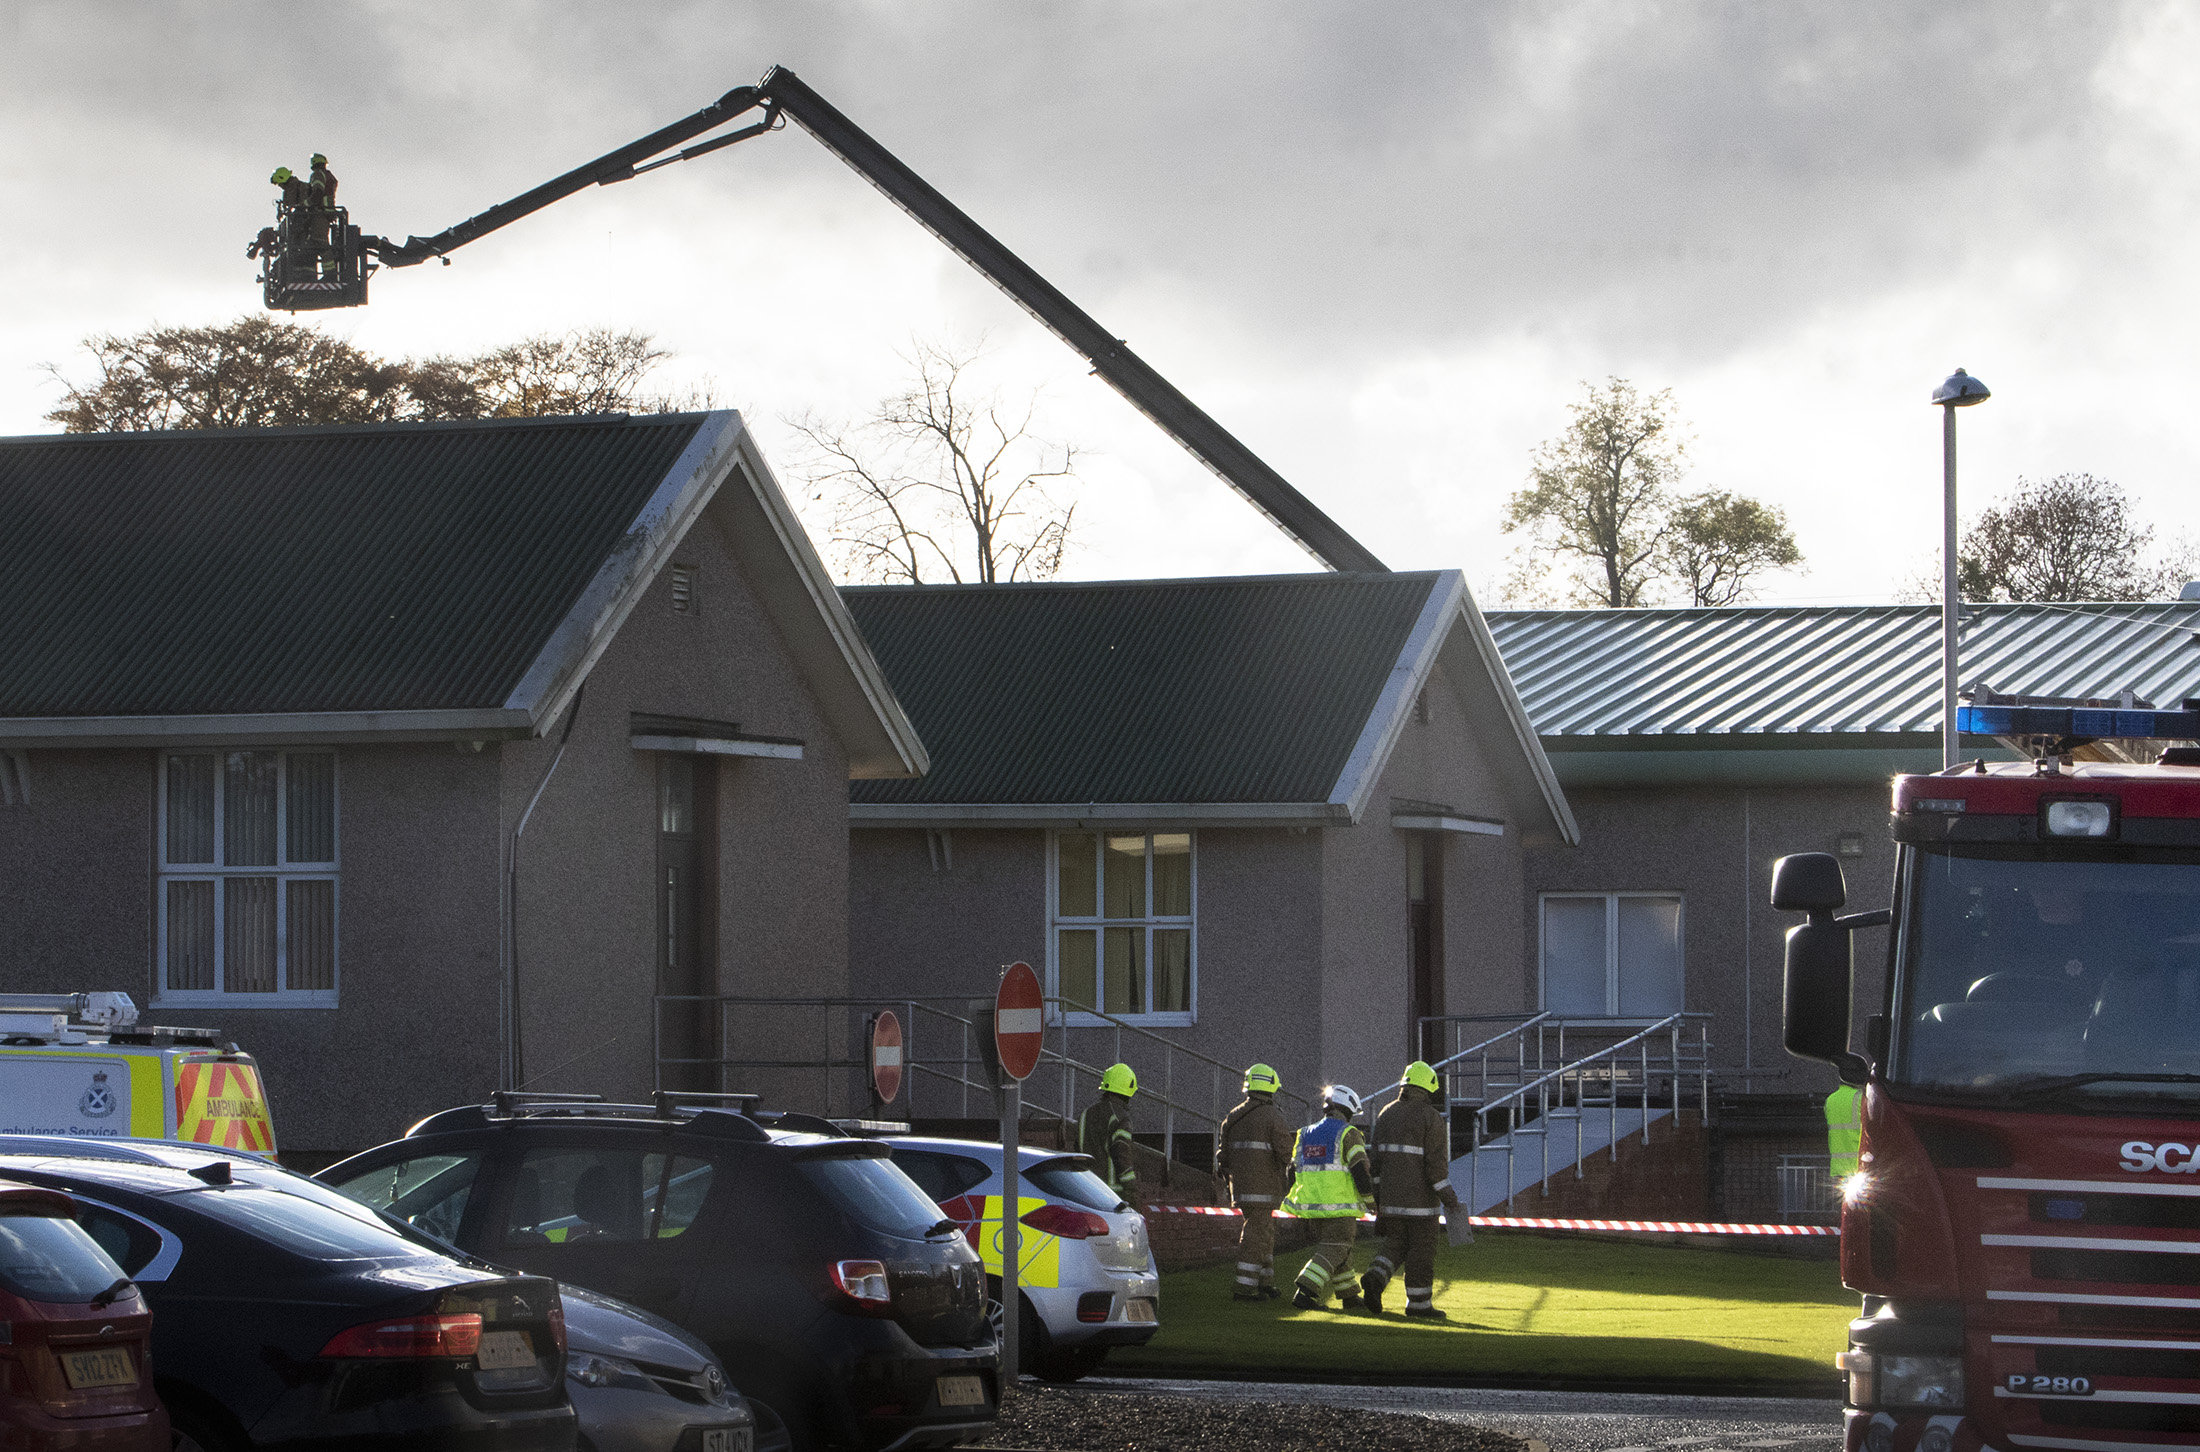 Emergency services called to fire at Stracathro Hospital near Brechin